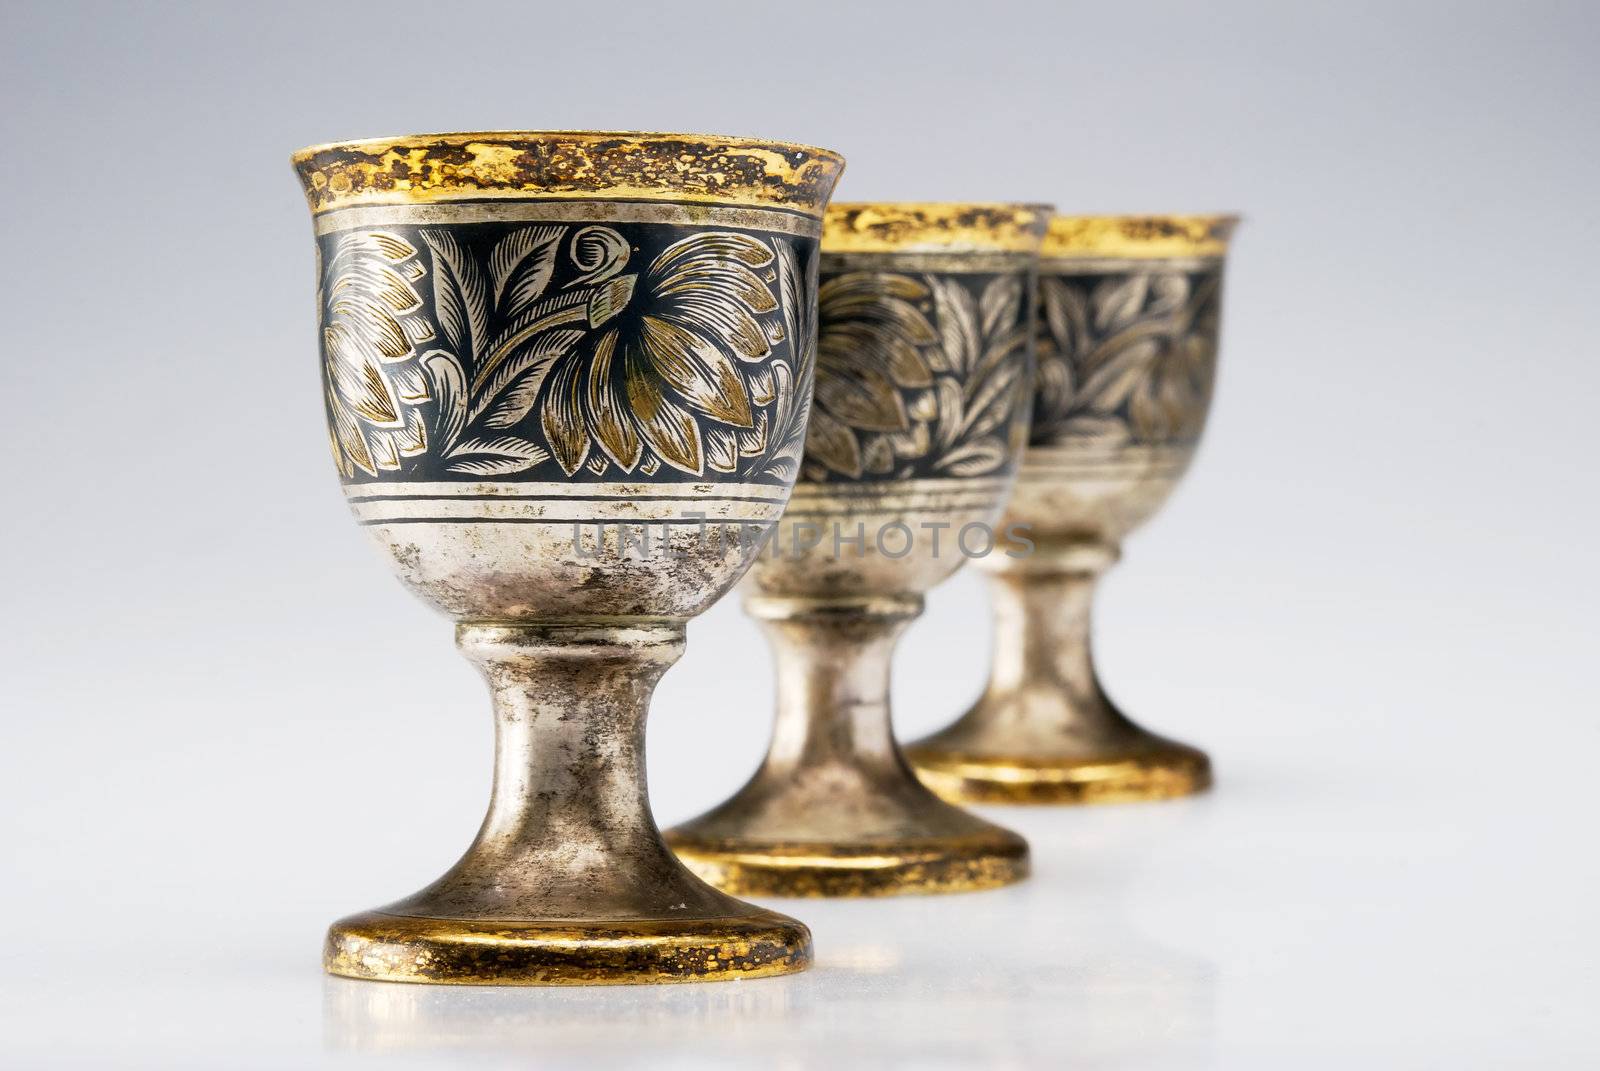 Three ancient wine cup in a line isolated over white background